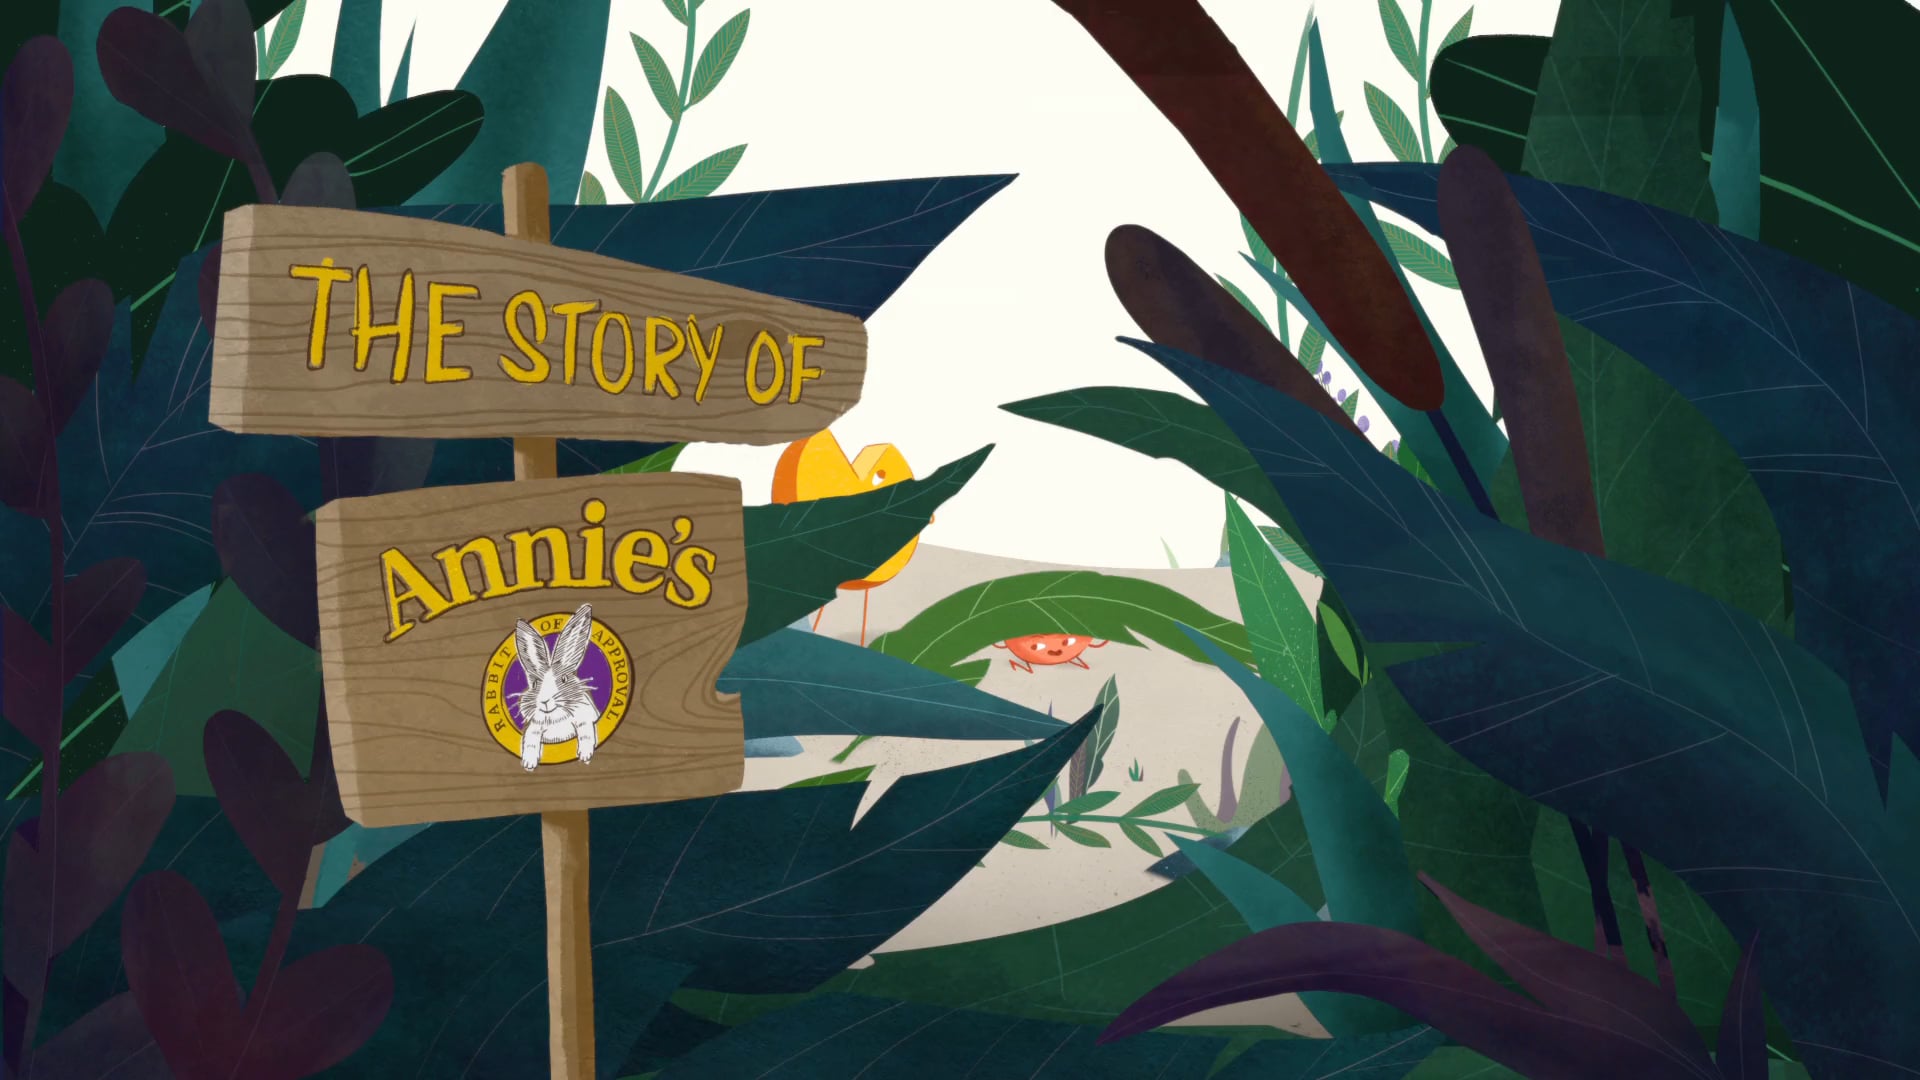 The Story of Annie's